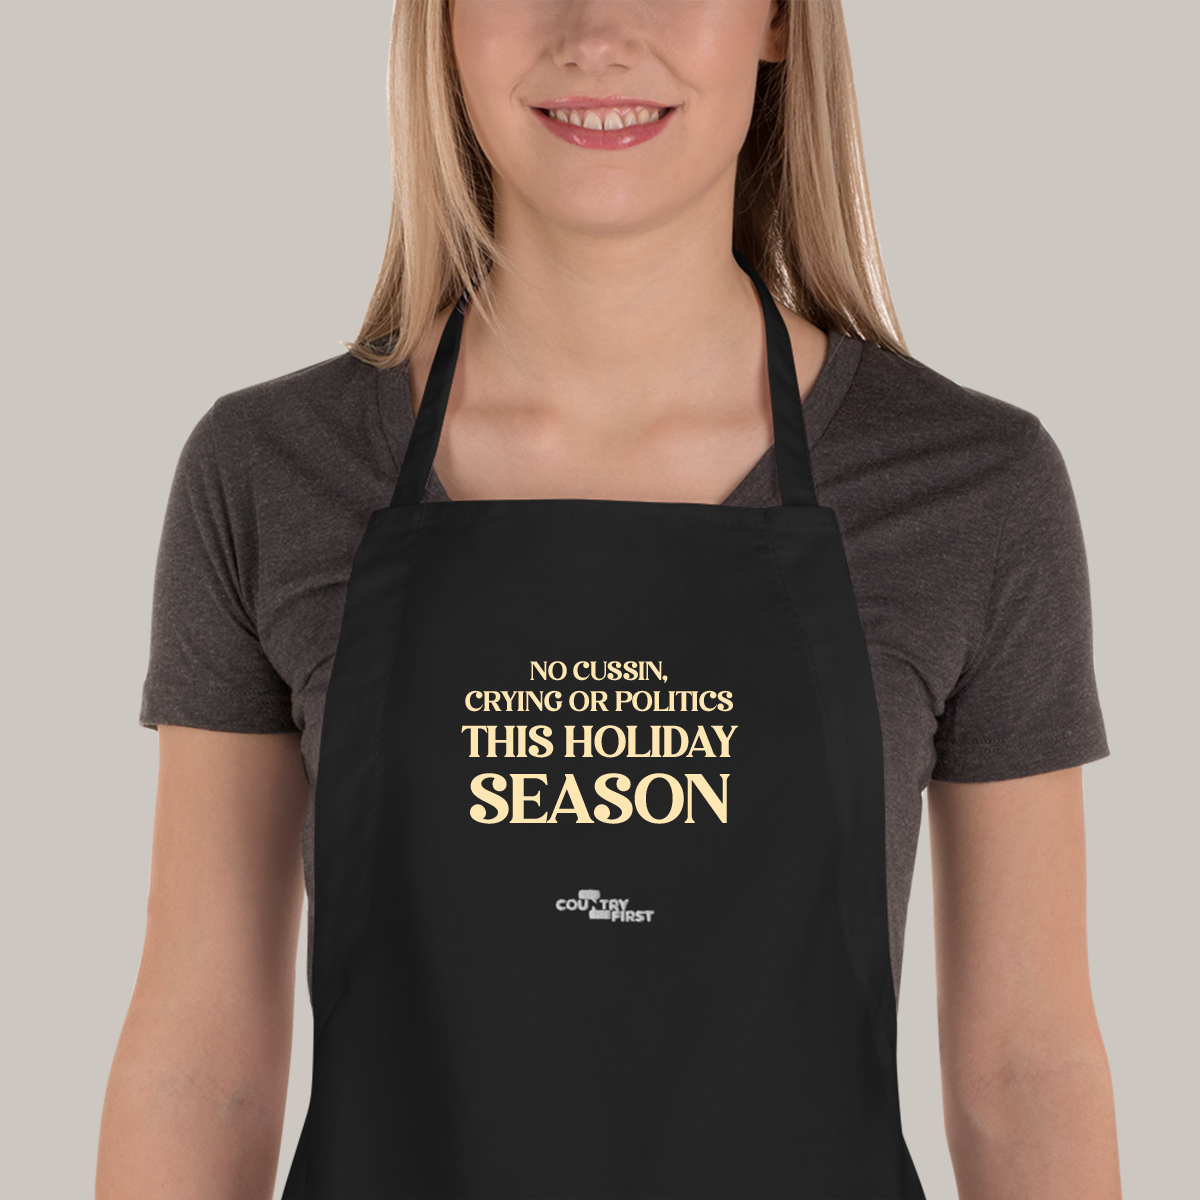 No Cussin’, Crying, or Politics Holiday Apron